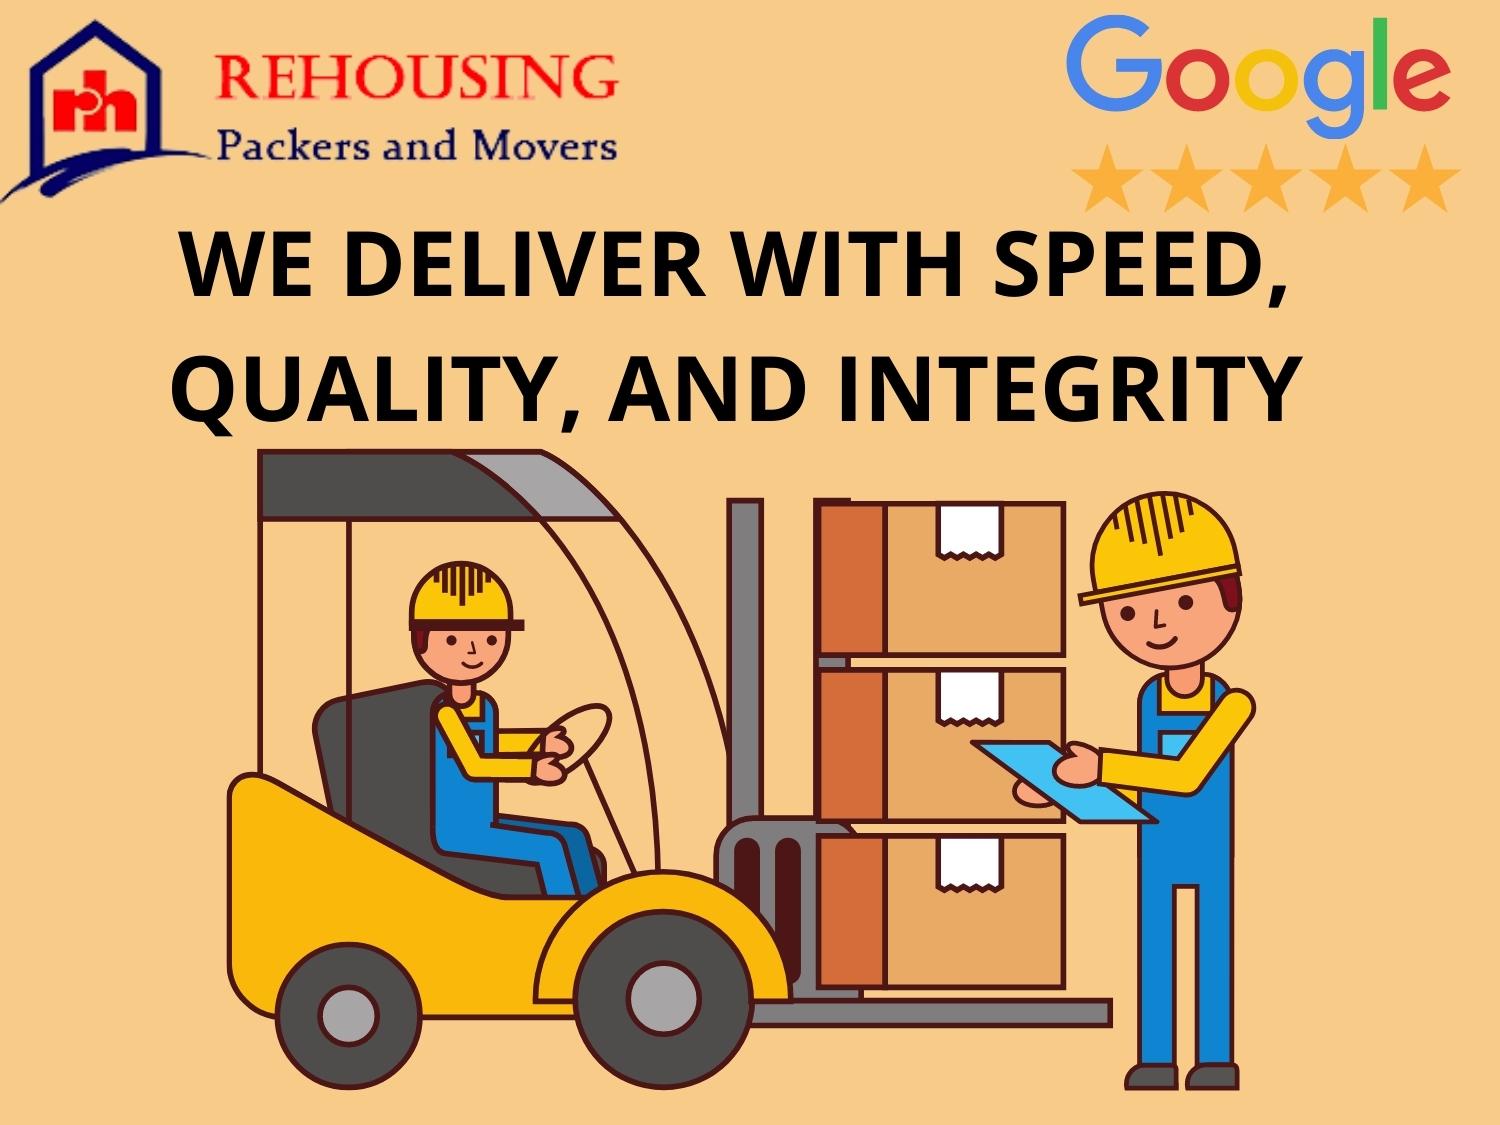 Courier services from Surat to Bangalore is dependable and secure, but they do not meet your desire for immediate delivery